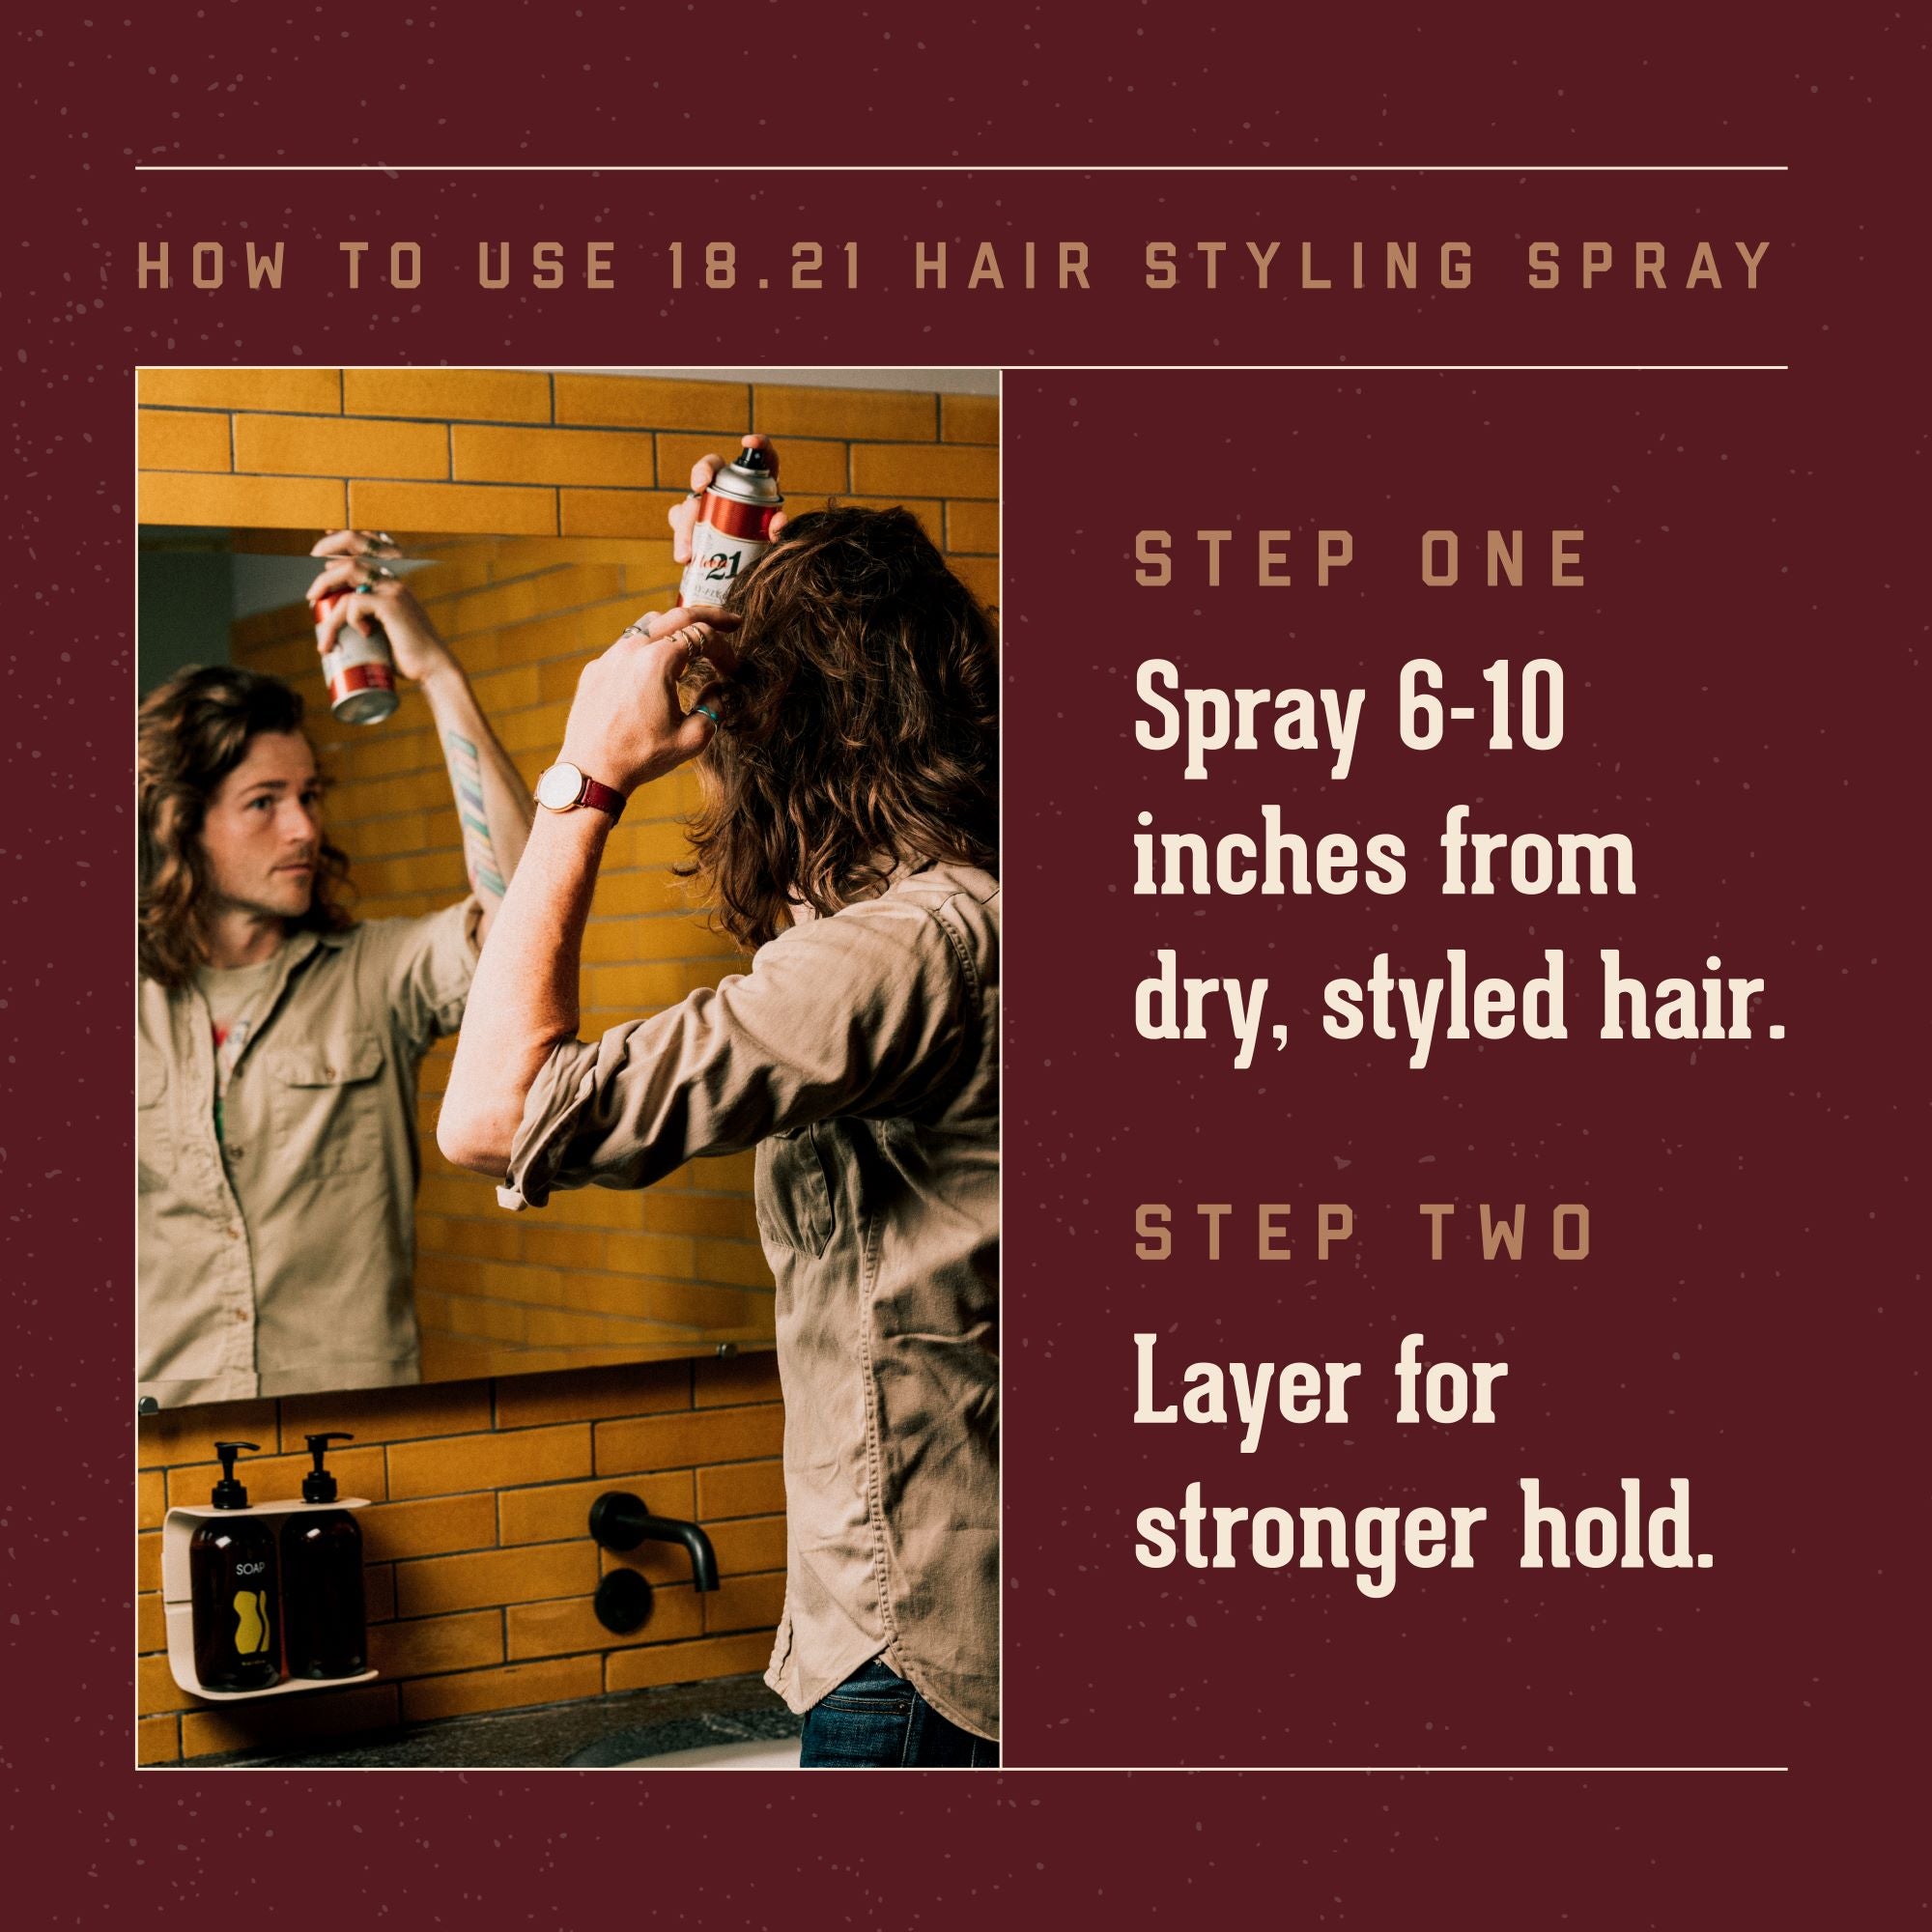 How To Use 18.21 Hair Styling Spray.   Step One:  Spray 6-10 inches from dry, styled hair.   Step Two:  Layer for stronger hold.